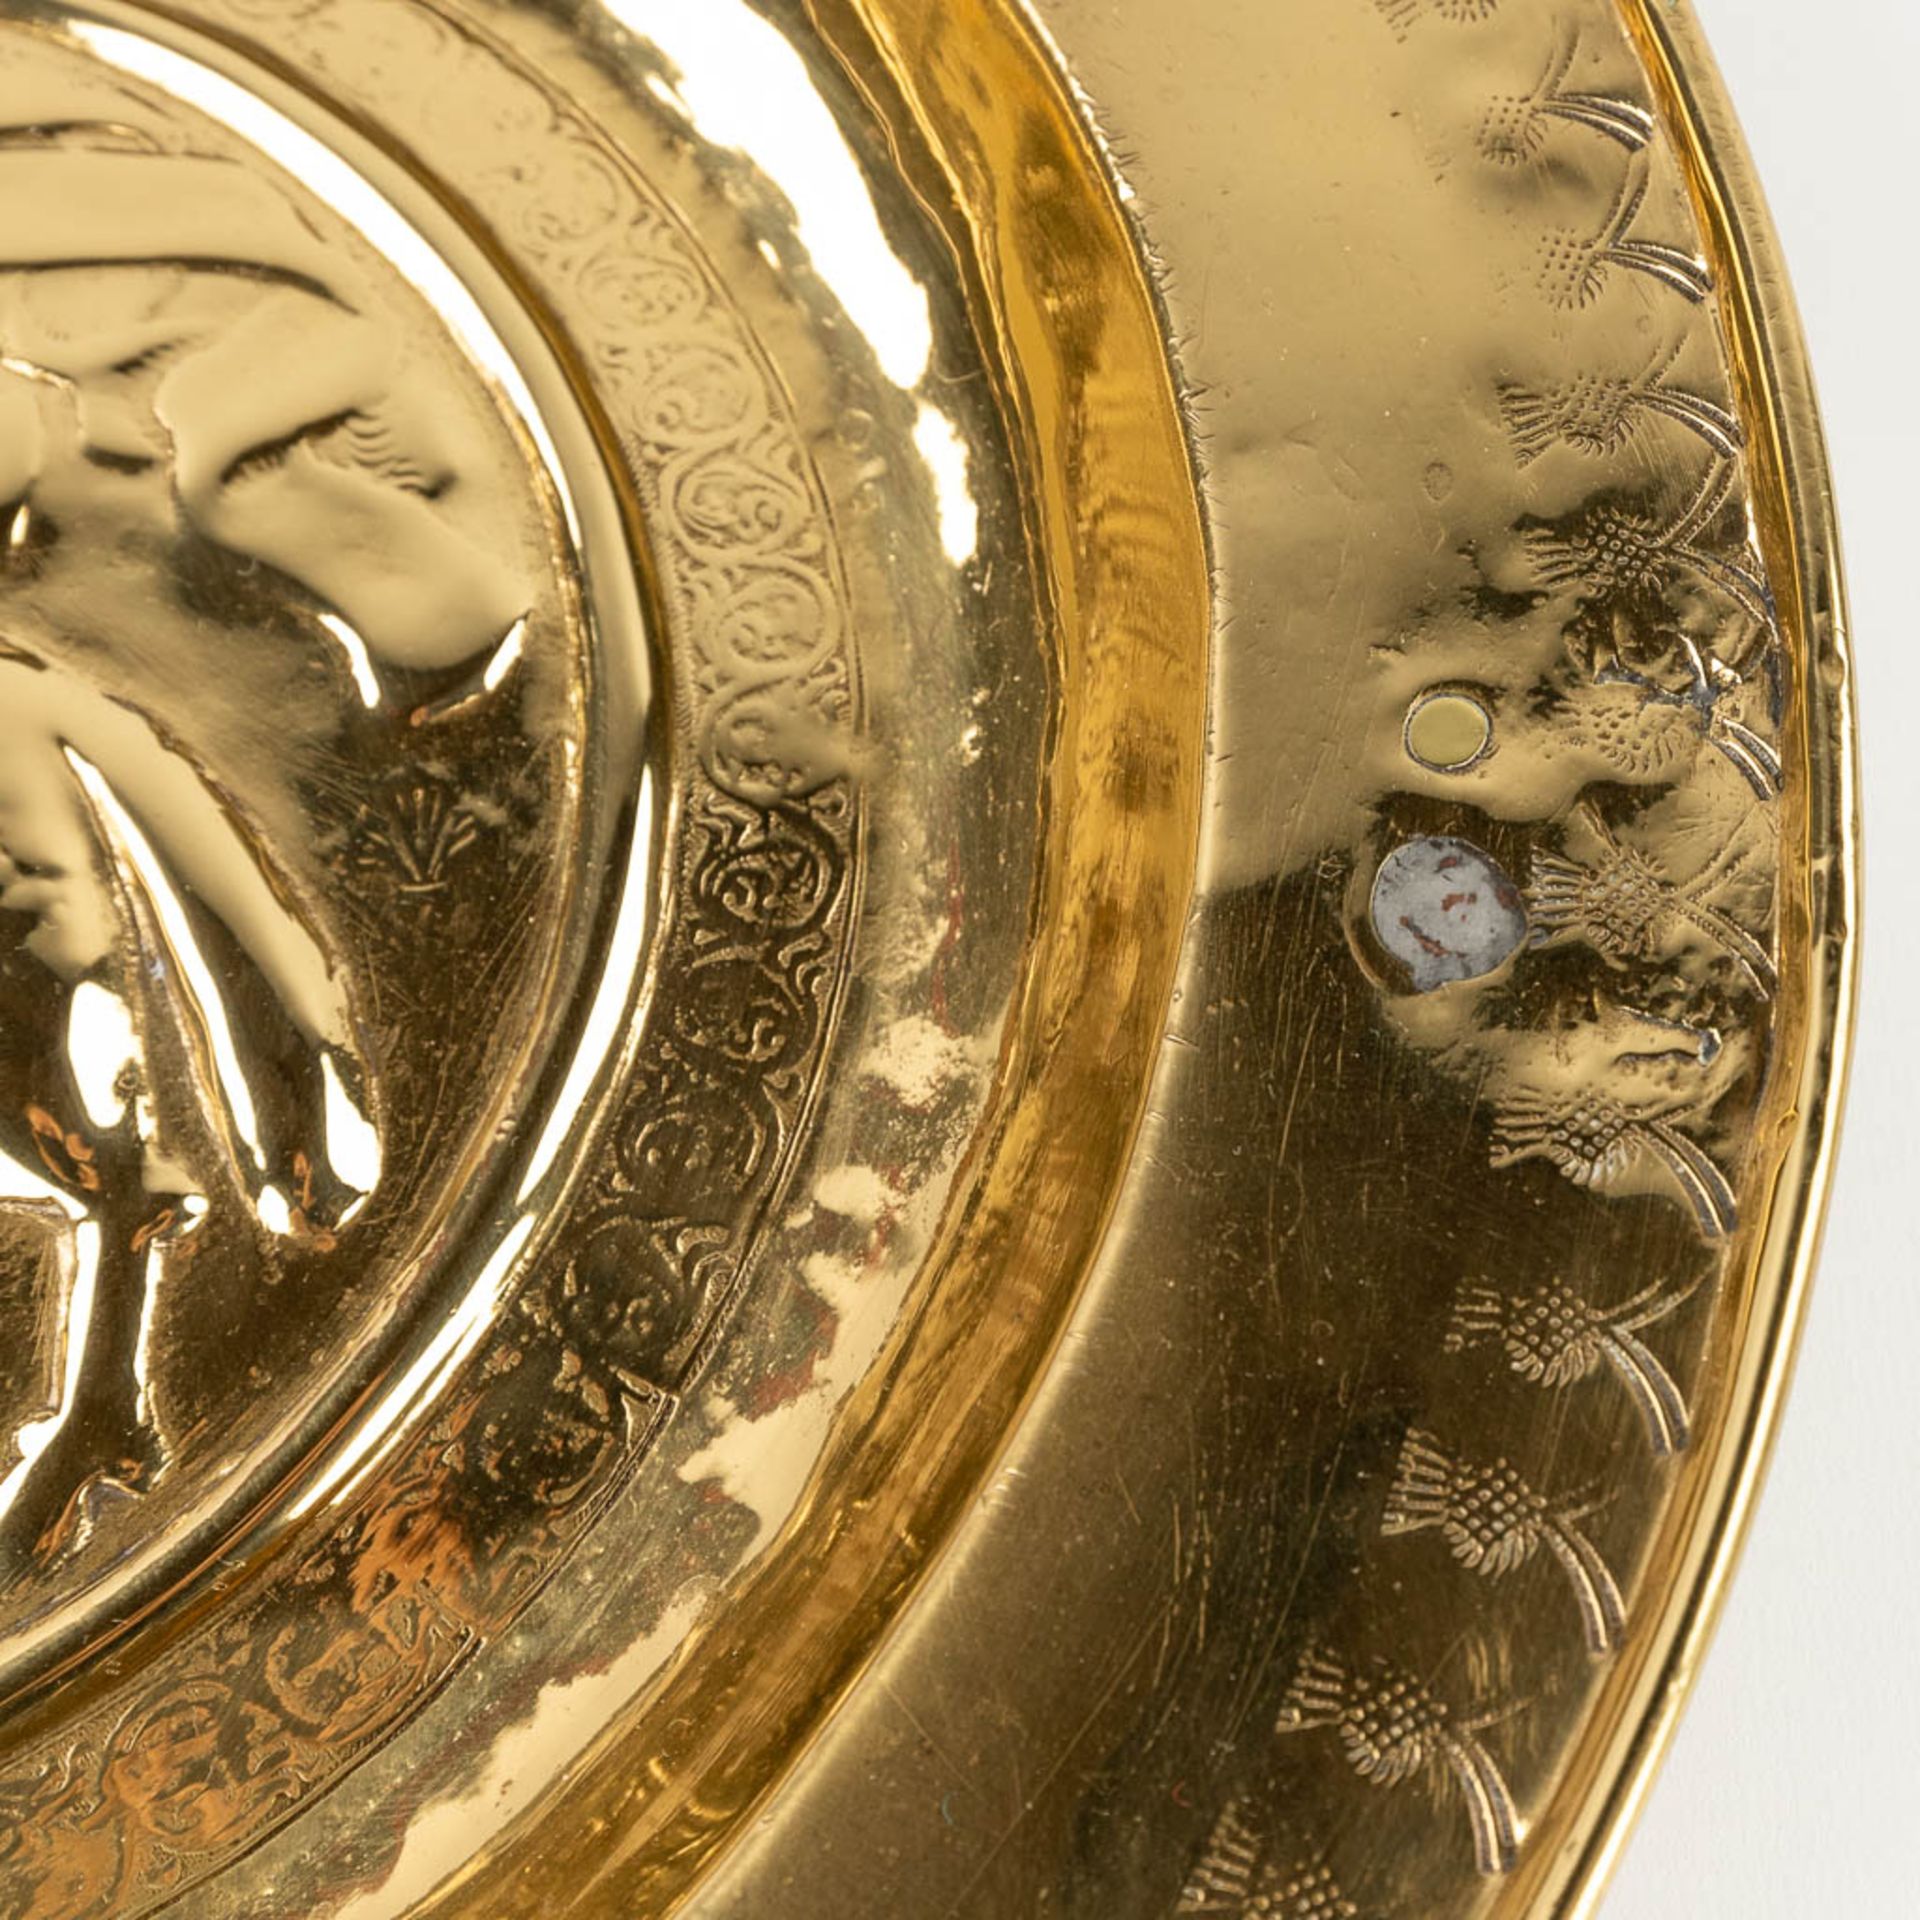 A large baptism bowl, Brass, images of the Holy Lamb. 16th/17th C. (H:3,7 x D:37 cm) - Image 4 of 12